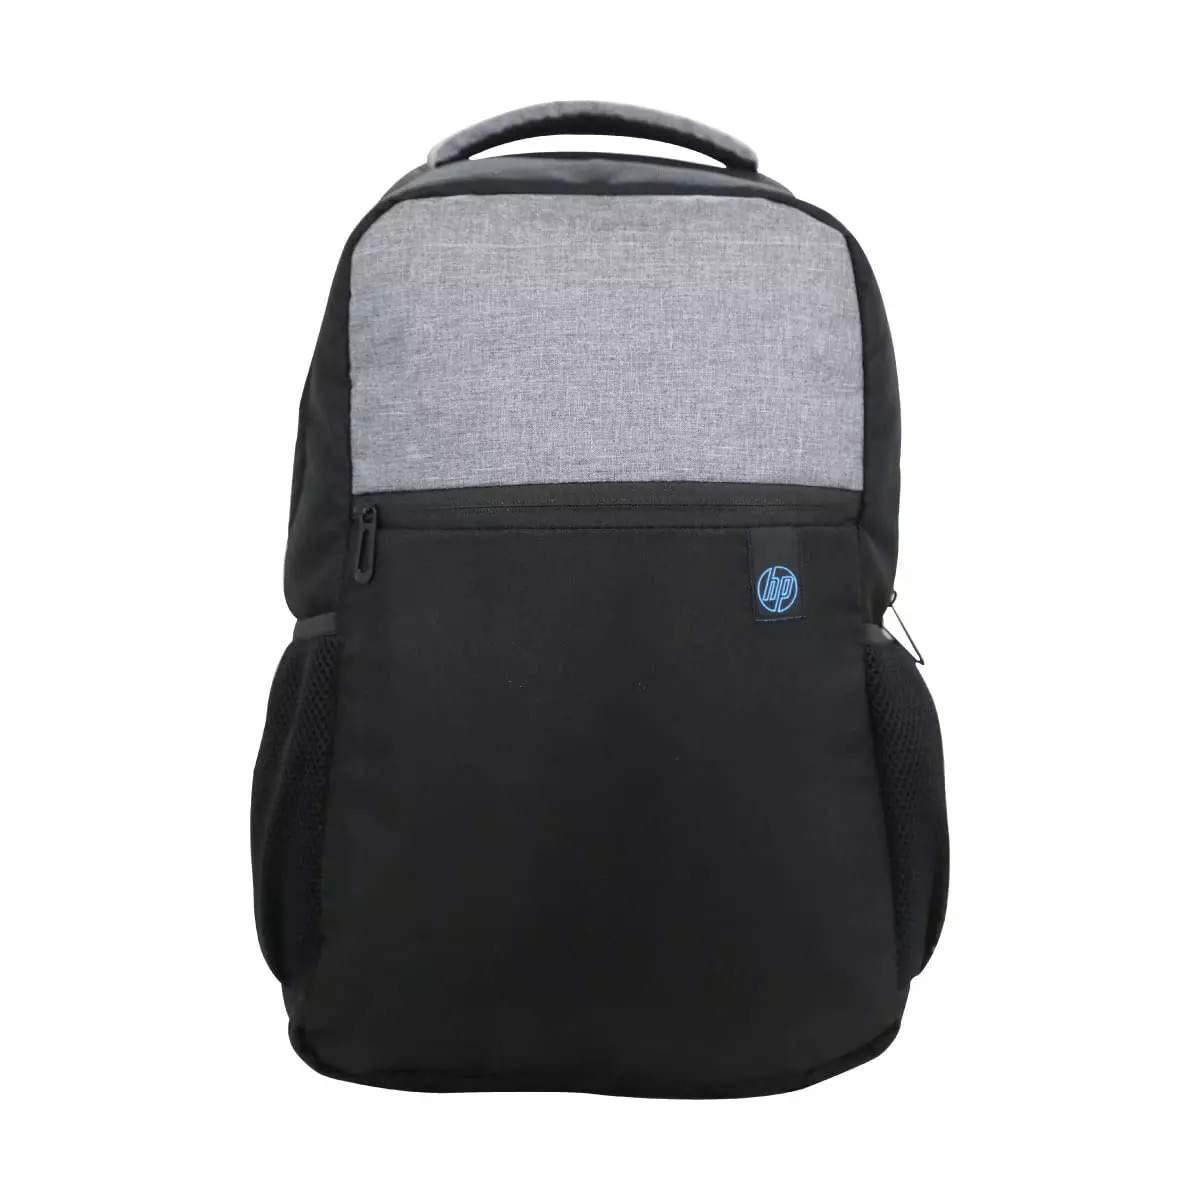 HP Premium HP-W2N96PA 15.6-inch Laptop Backpack (Blue/Grey) - Buy HP  Premium HP-W2N96PA 15.6-inch Laptop Backpack (Blue/Grey) Online at Low  Price in India - Amazon.in